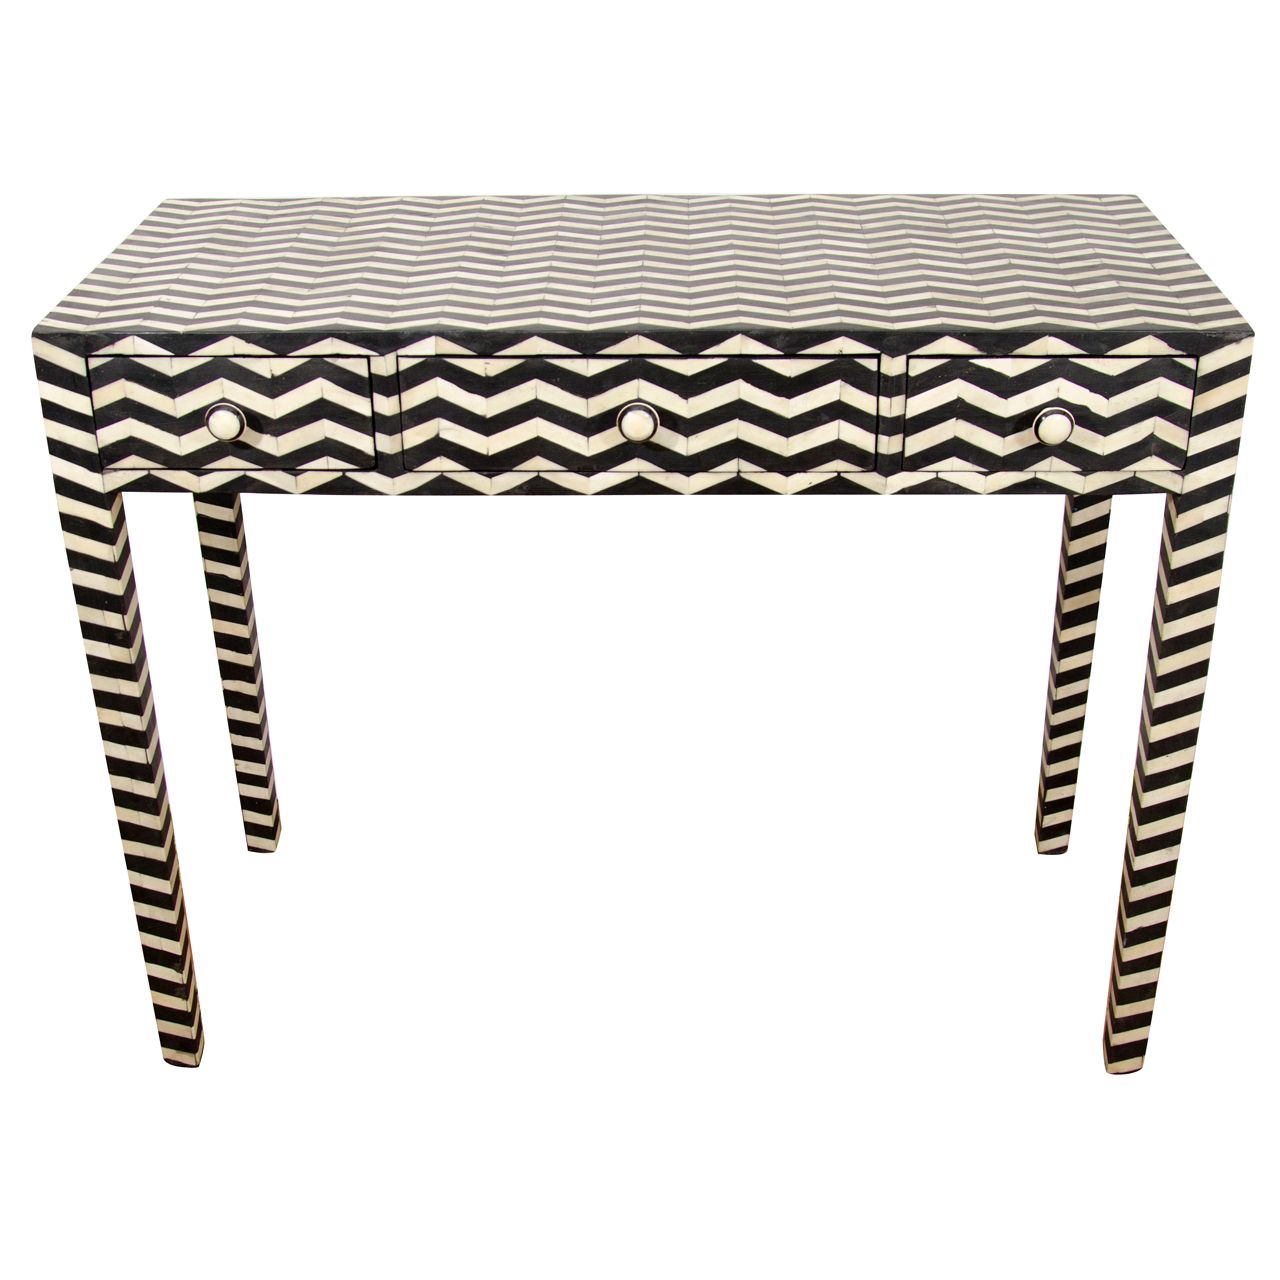 Black And White Bone Inlay Side Table | Furniture Design | Pinterest For Black And White Inlay Console Tables (View 2 of 30)